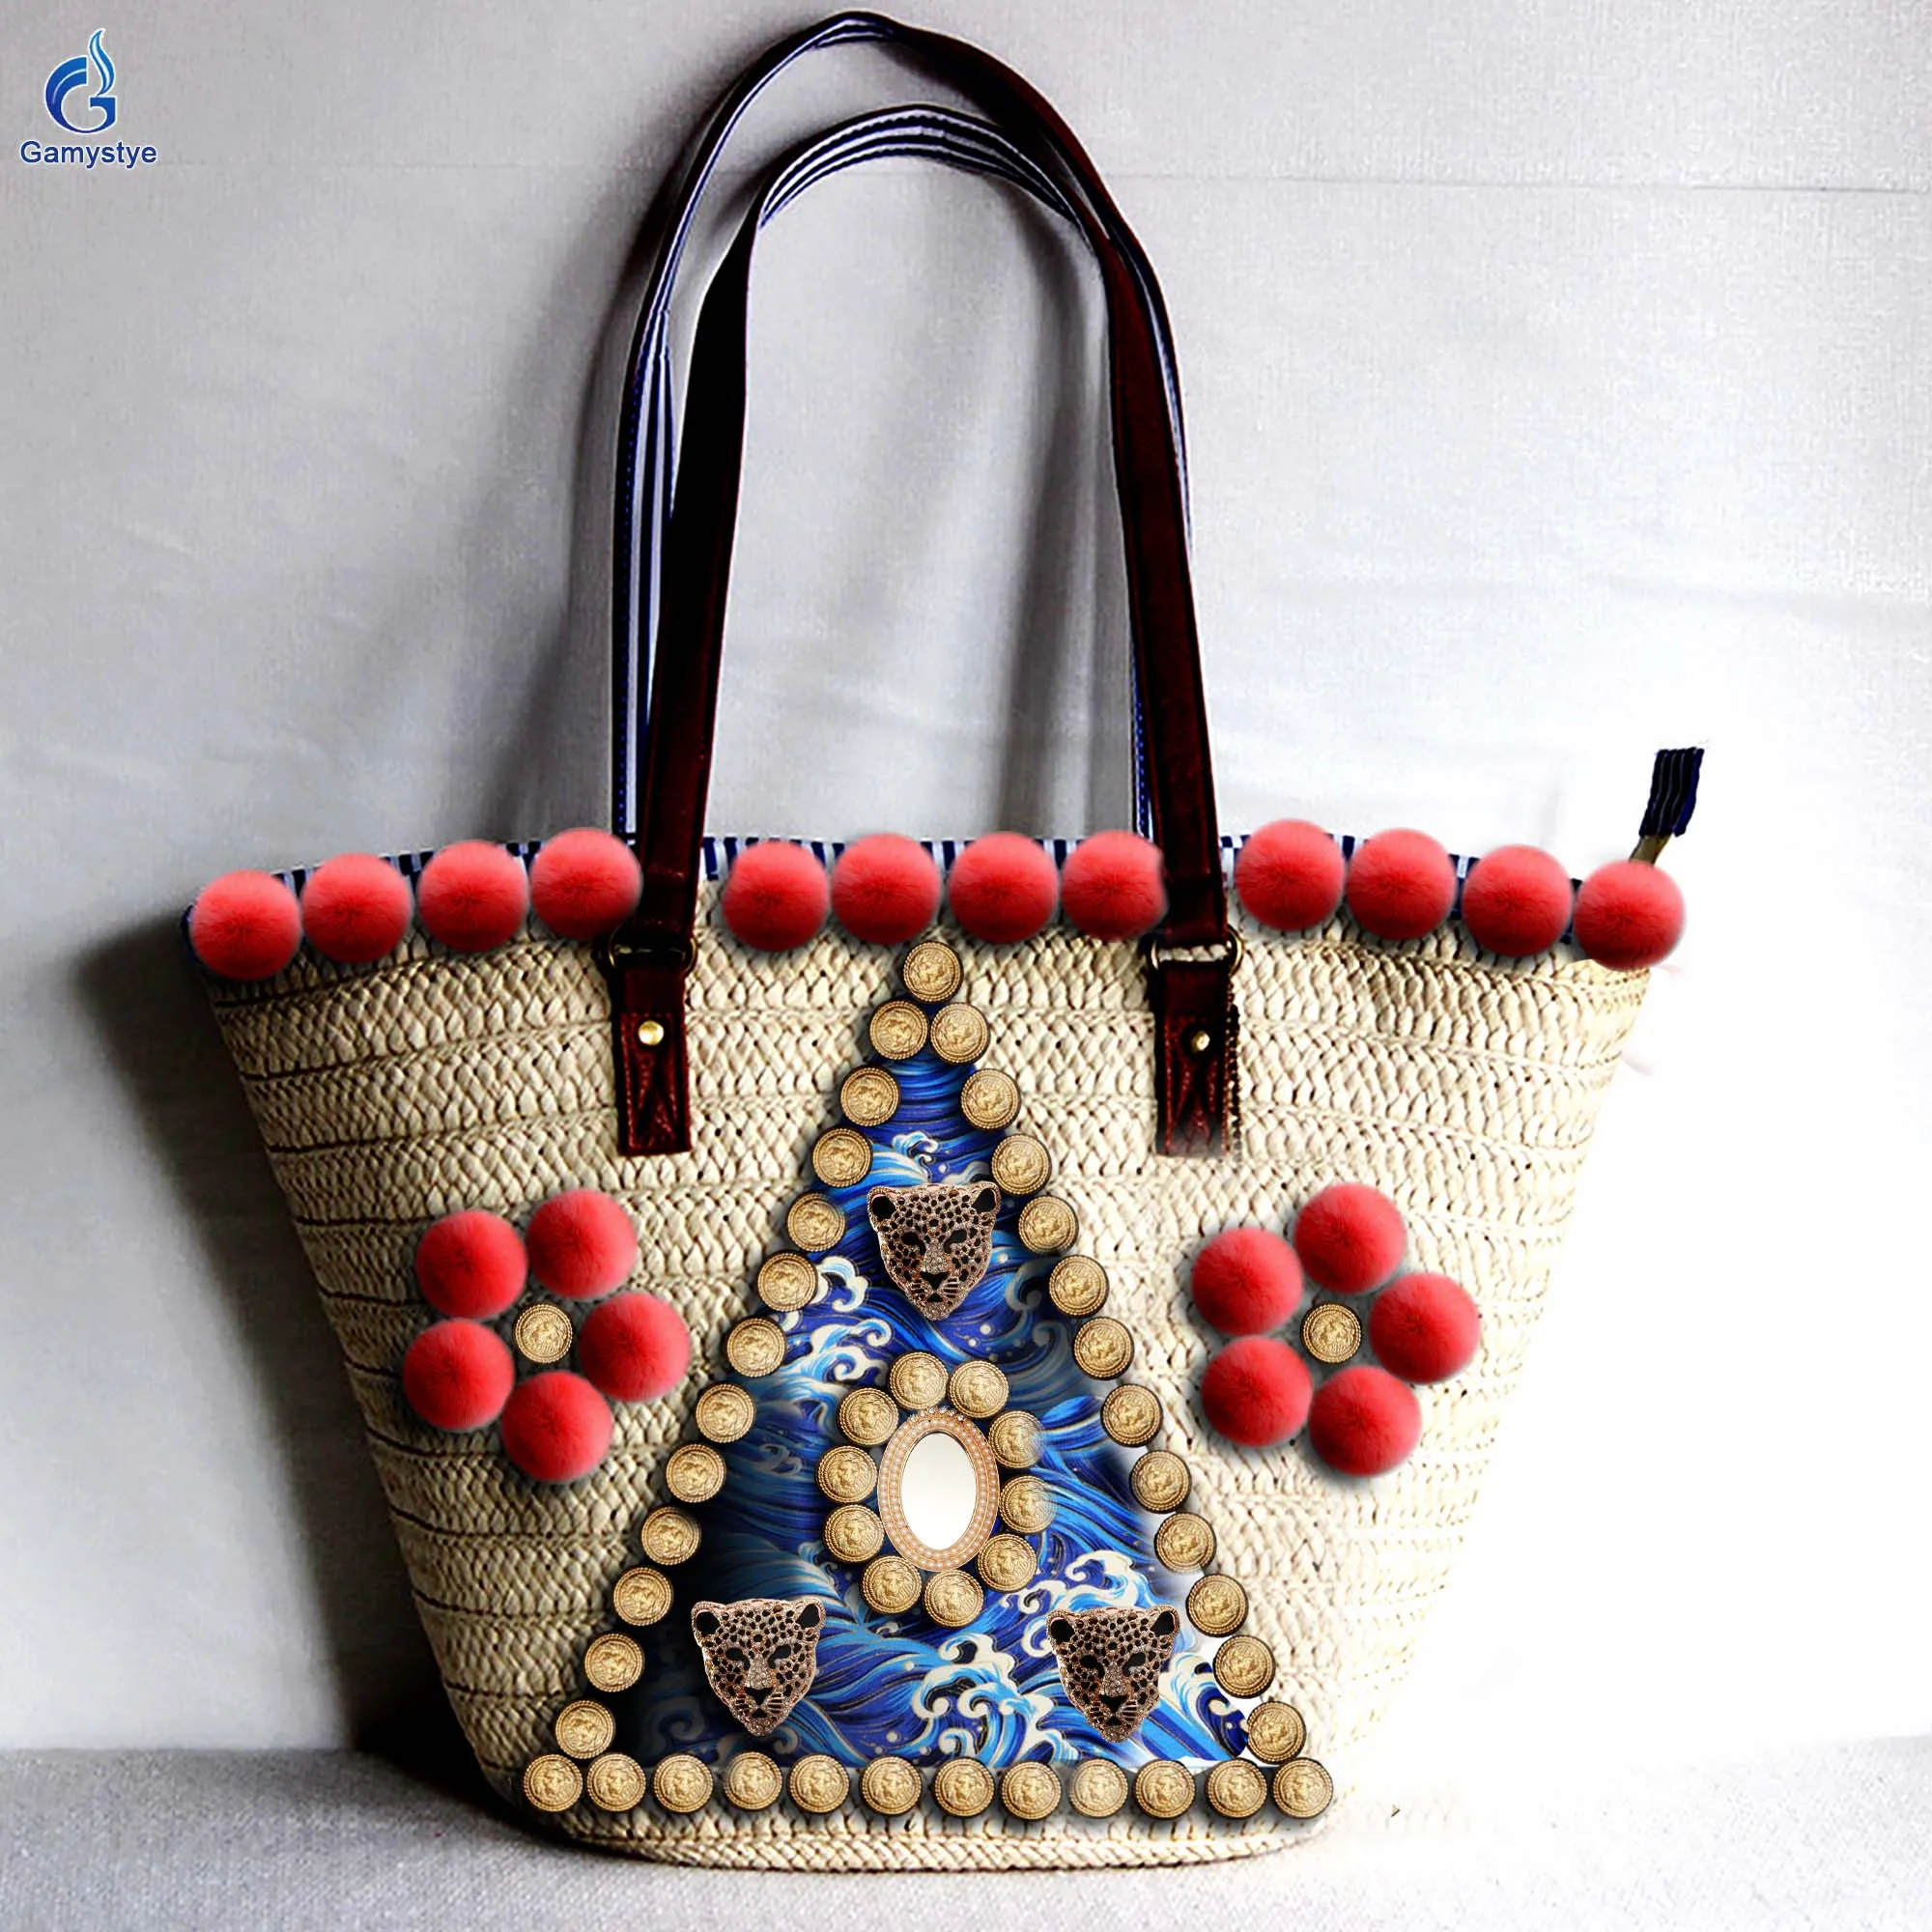 Gamystye Artisc Embroidered Hand Woven Straw Bags Designer Leopard Totes Women purses and handbags Straw Rattan Hairballs